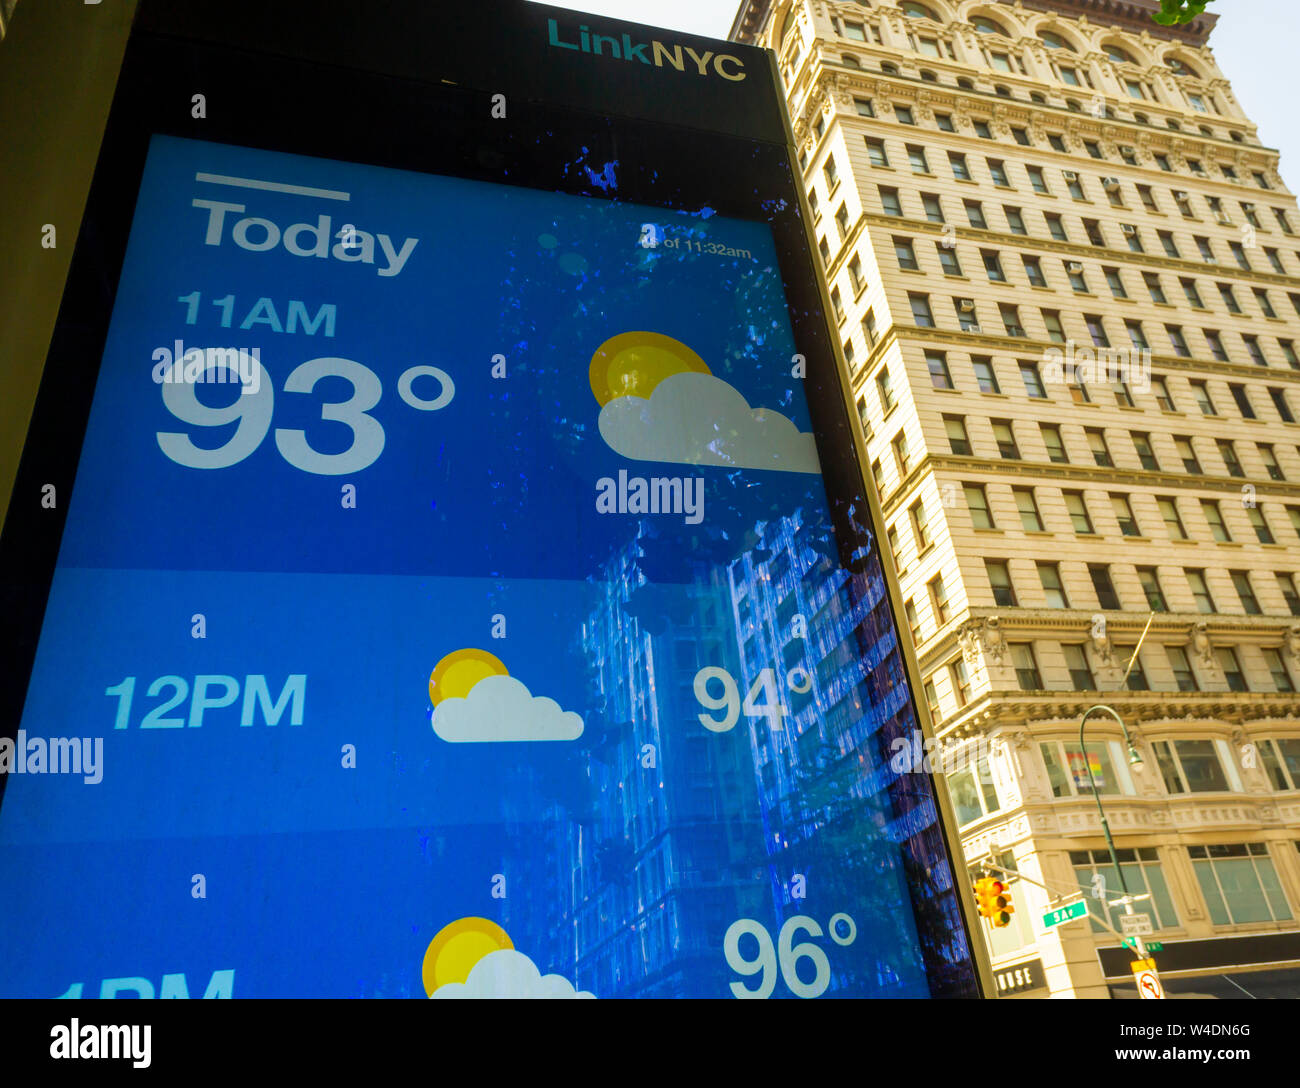 A LinkNYC street kiosk displays the temperature at 11AM in the Chelsea neighborhood of New York on Saturday, July 20, 2019. An excessive heat warning is in effect in New York from noon Friday until 8PM Sunday as the oppressive combination of heat and humidity will make it feel like 105 degrees F. (© Richard B. Levine) Stock Photo